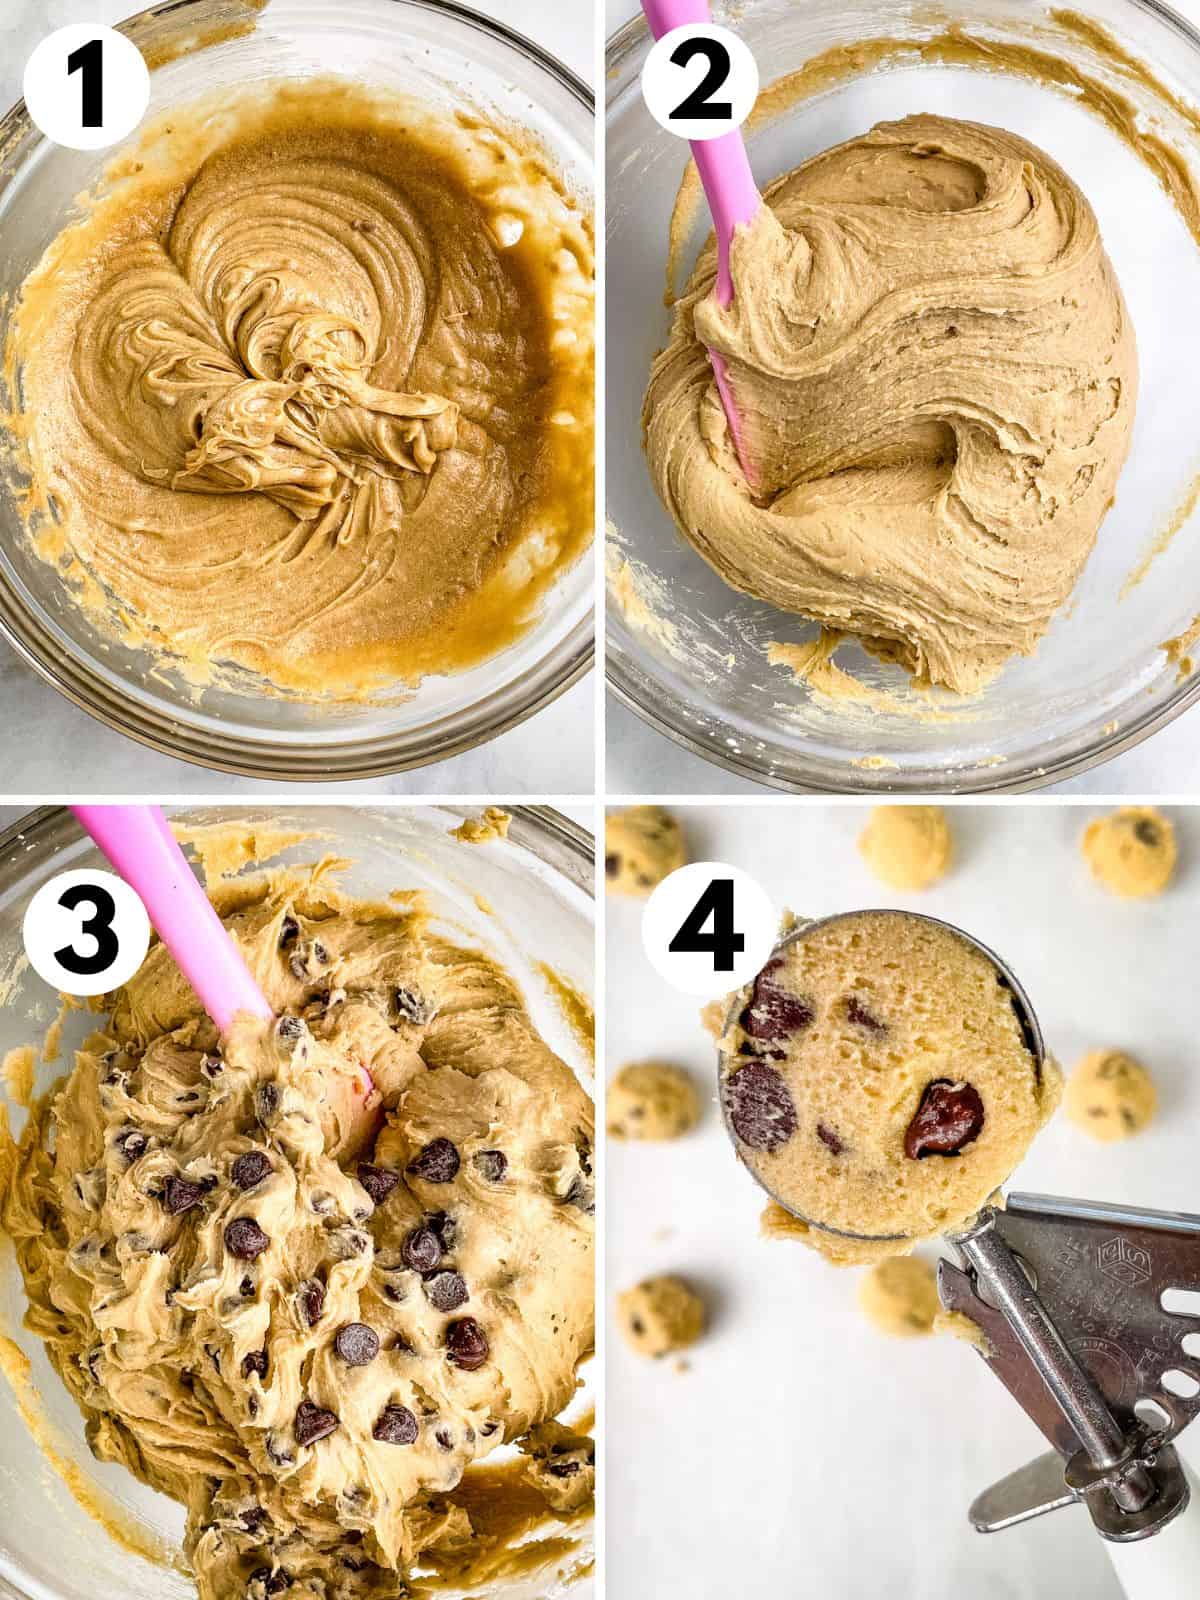 Four steps for mixing gluten-free chocolate chip cookie dough. 1. Mixing the butter, sugar, and eggs. 2. The dough. 3. Adding the chocolate chips. 4. Scooping the dough.